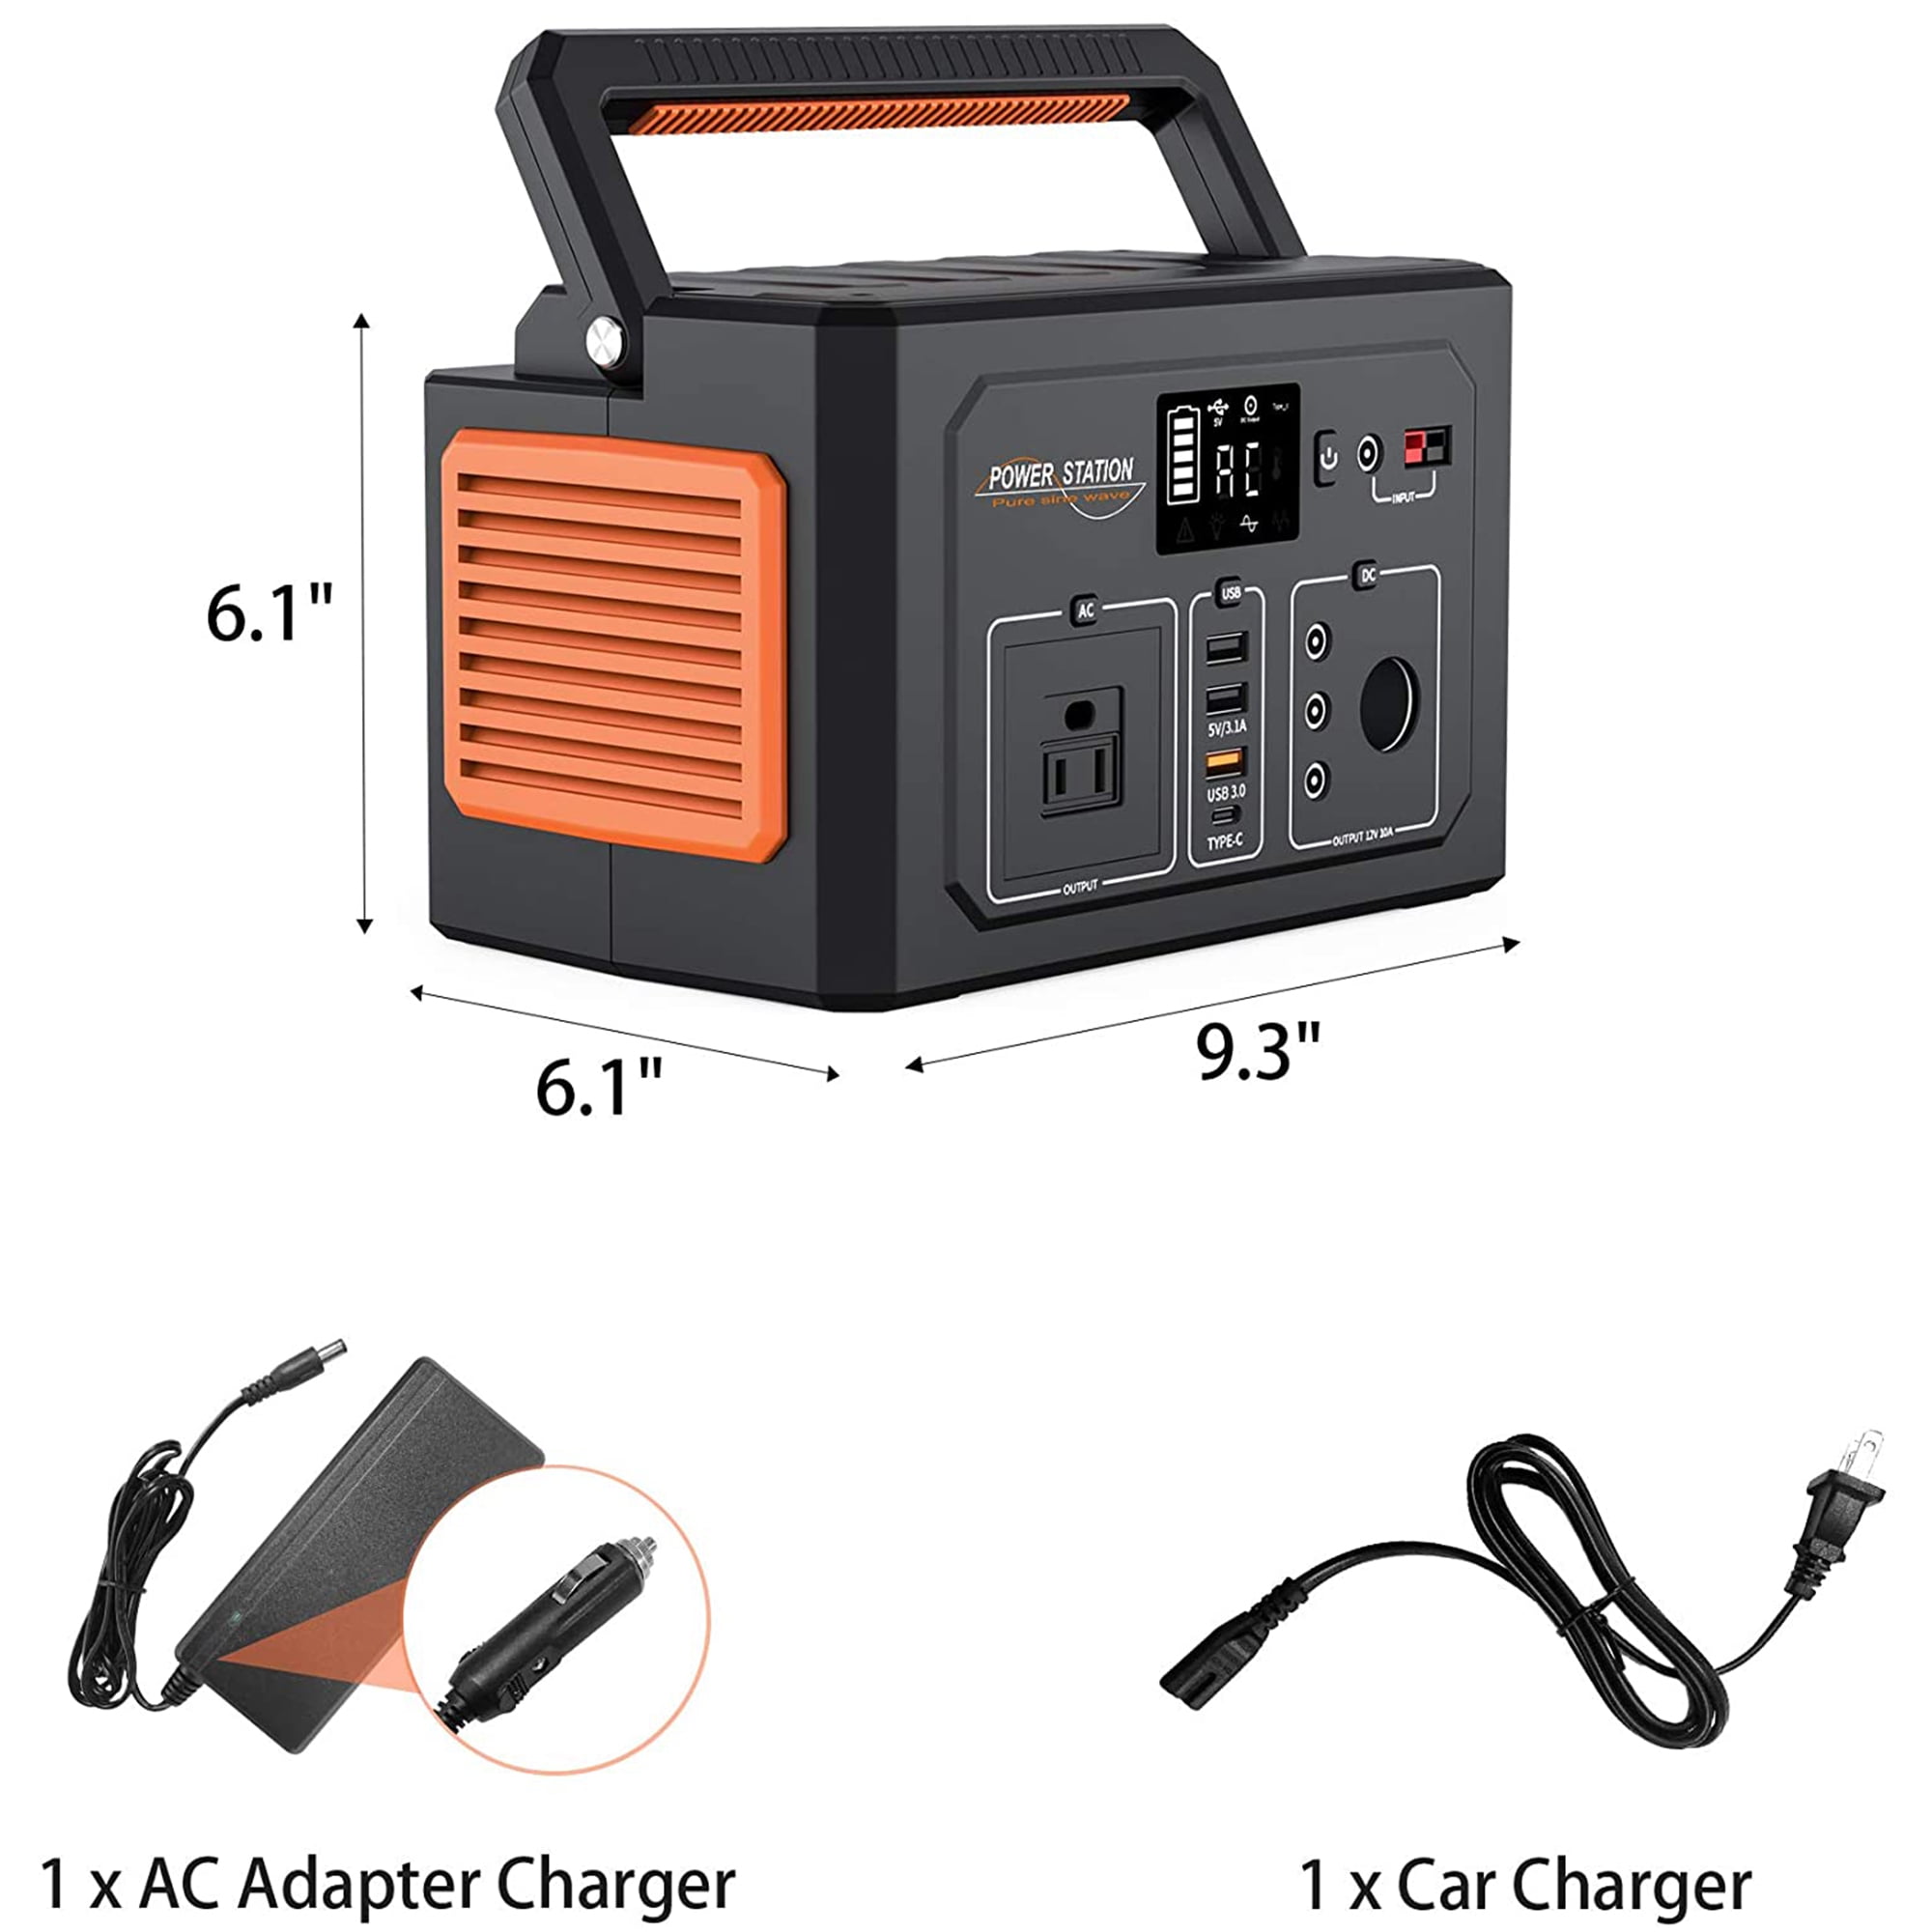 Portable Generator Power Station 500,110V/520Wh 3 Charging ways & 9  Outlets,LED Display & Flashlight,Mobile Solar Generator (Solar Panel  Optional),for CAPA Outdoors Camping Travel Emergency 